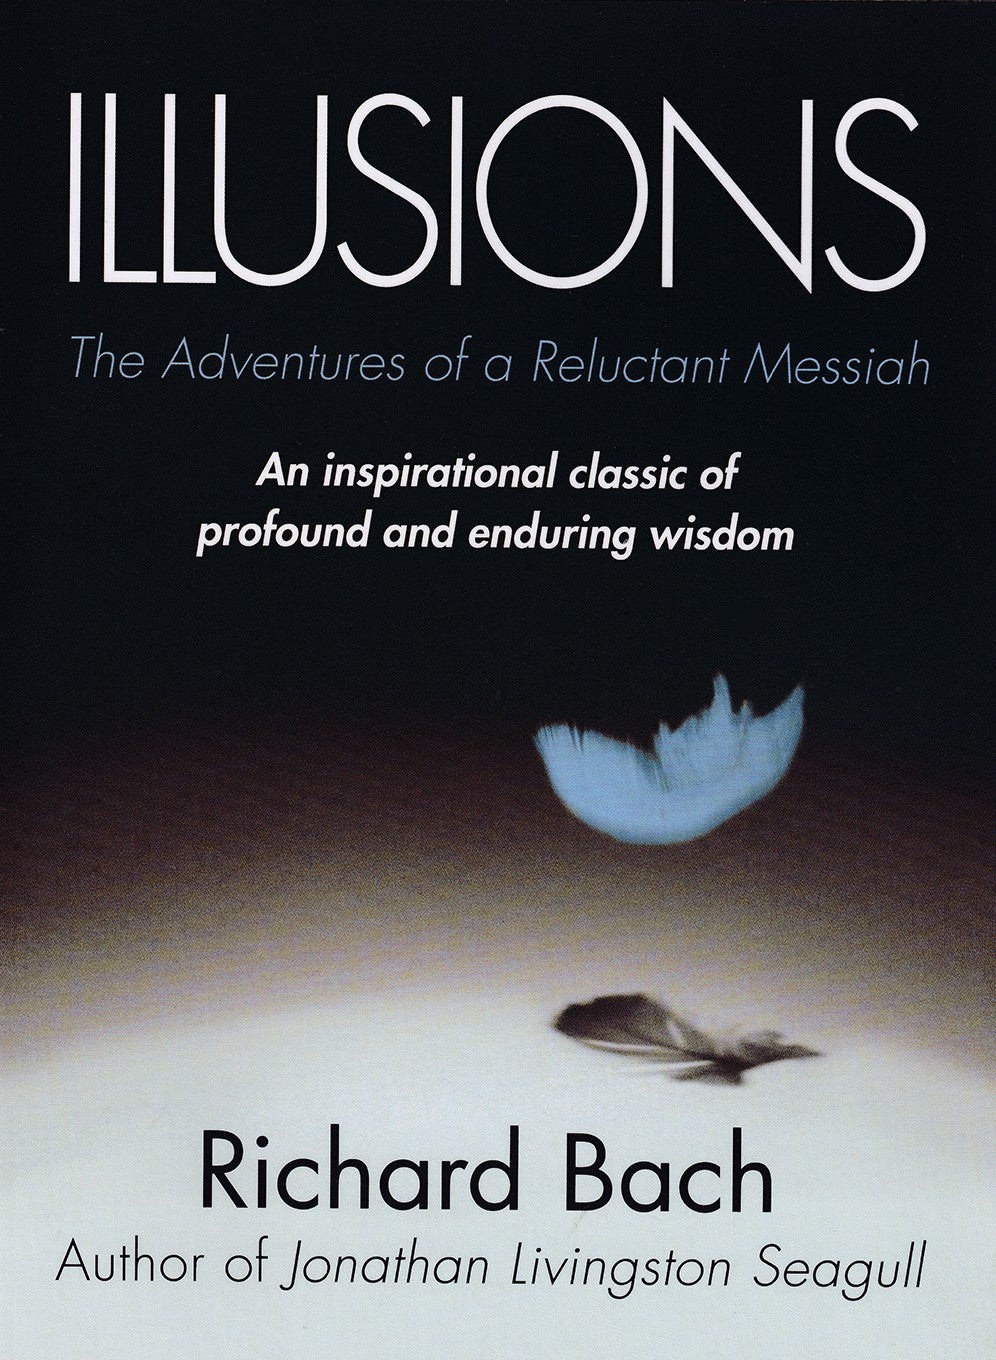 Illusions - the Adventures of a Reluctant Messiah